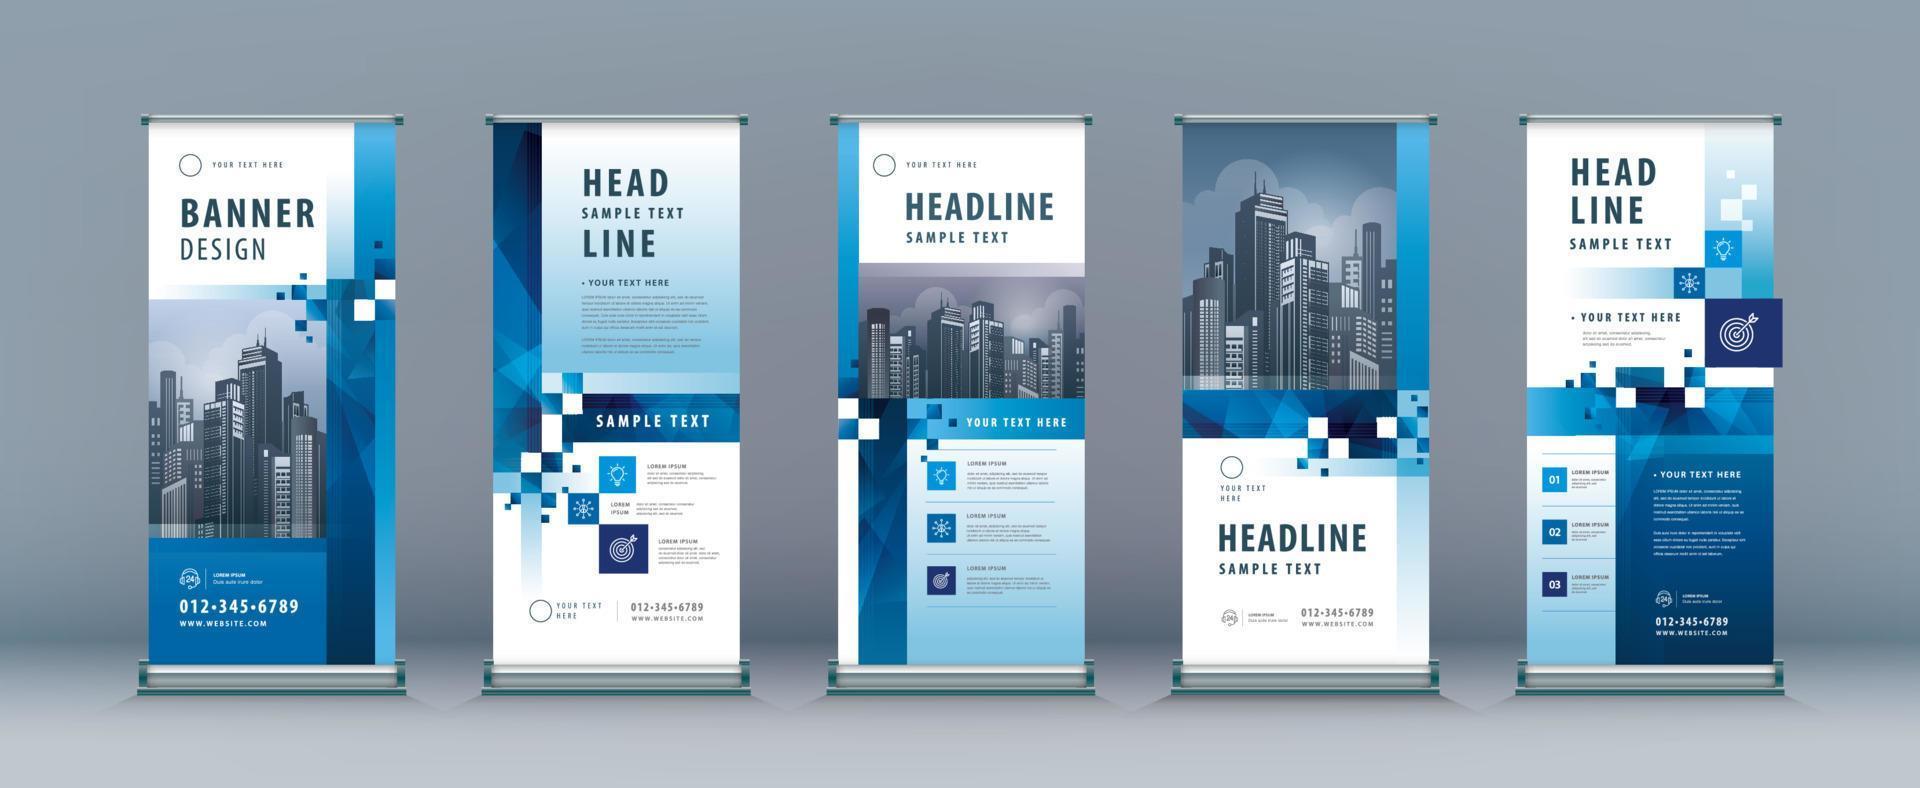 Square Blue Pixel Business Roll Up Set. Standee Banner Template Design. vector